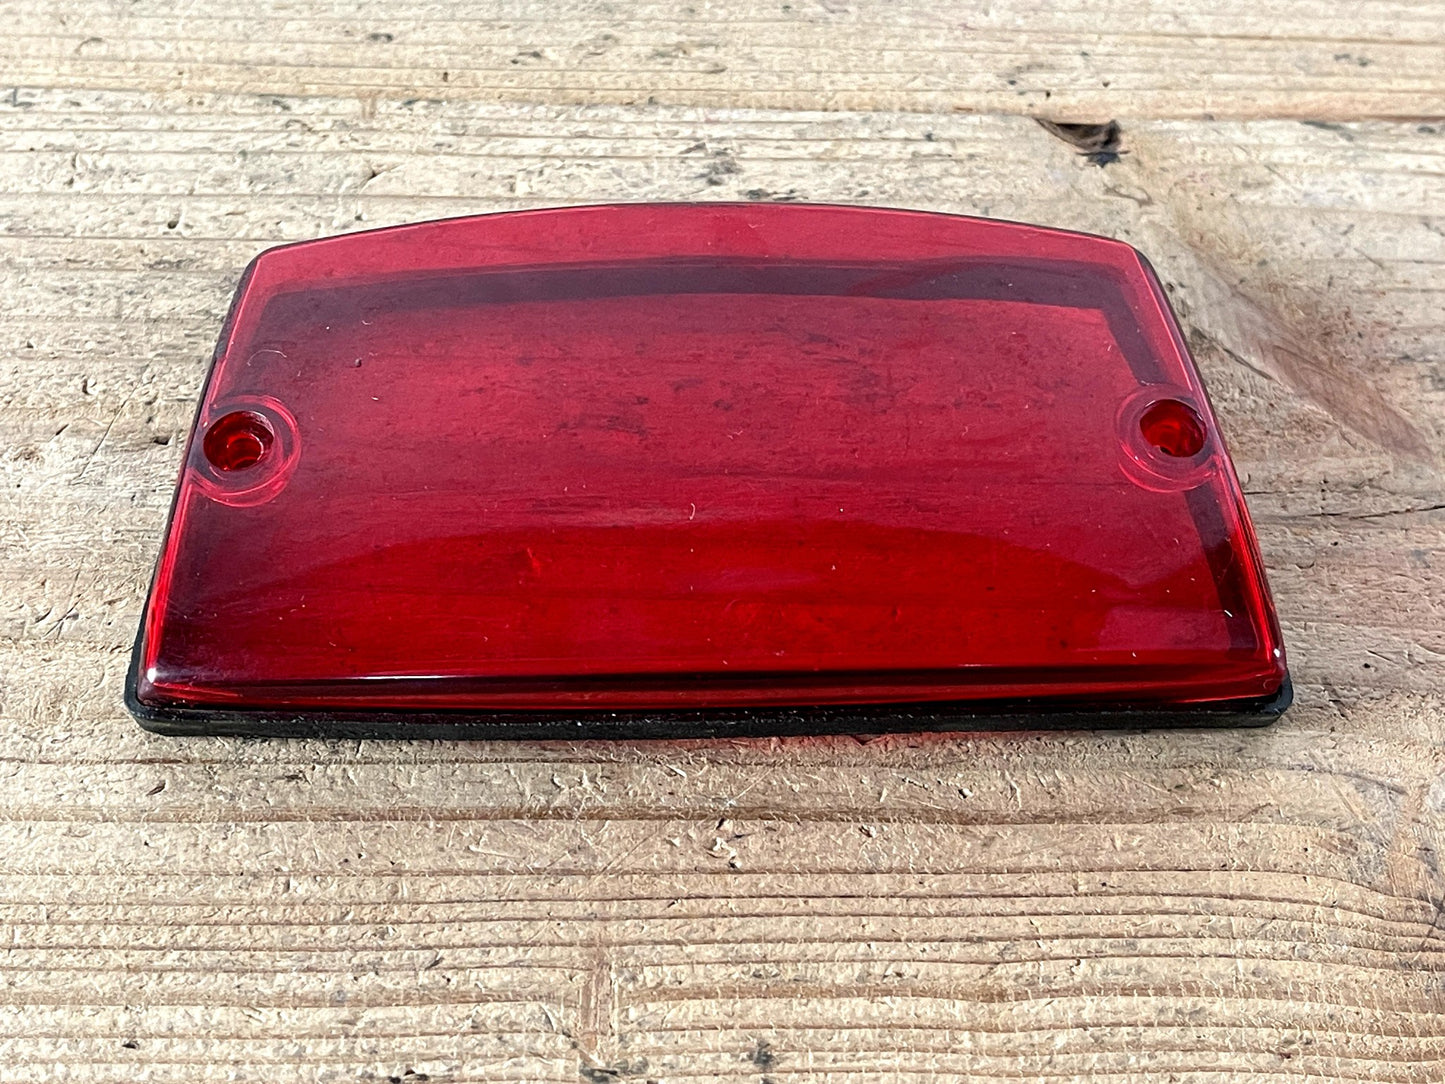 Federal Signal StreetHawk Lightbar - Old Style RED Secondary Lens with Gasket